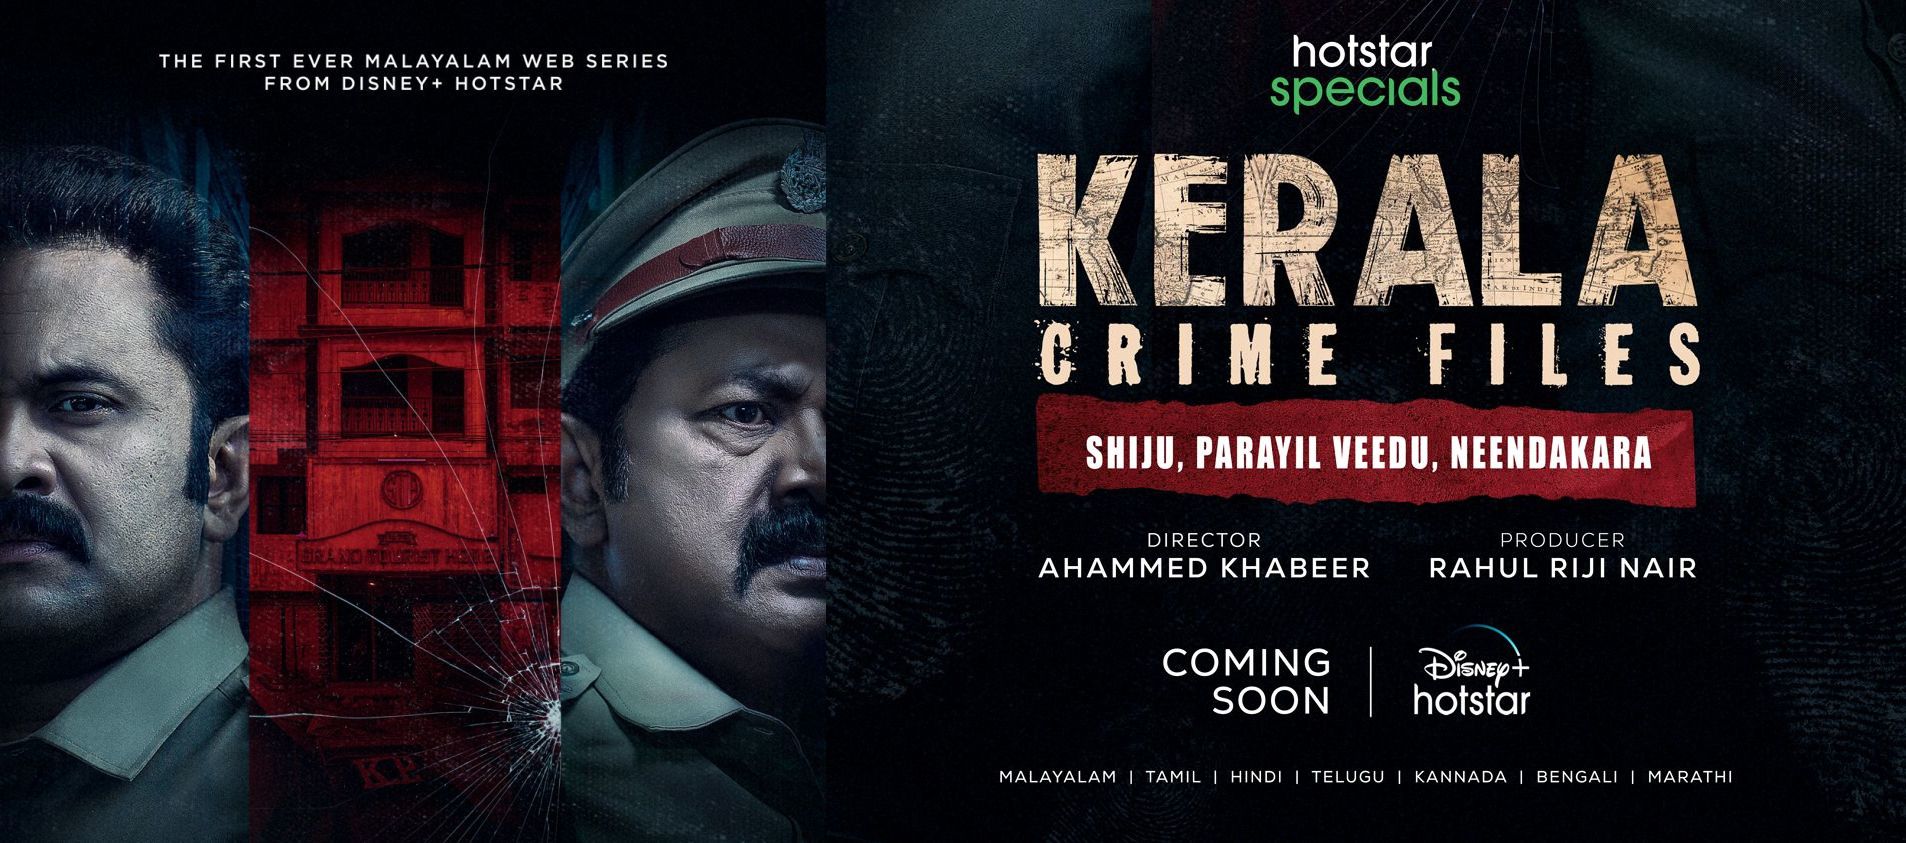 Gold Malayalam Movie OTT Release Date on Prime Video - 29th December 8